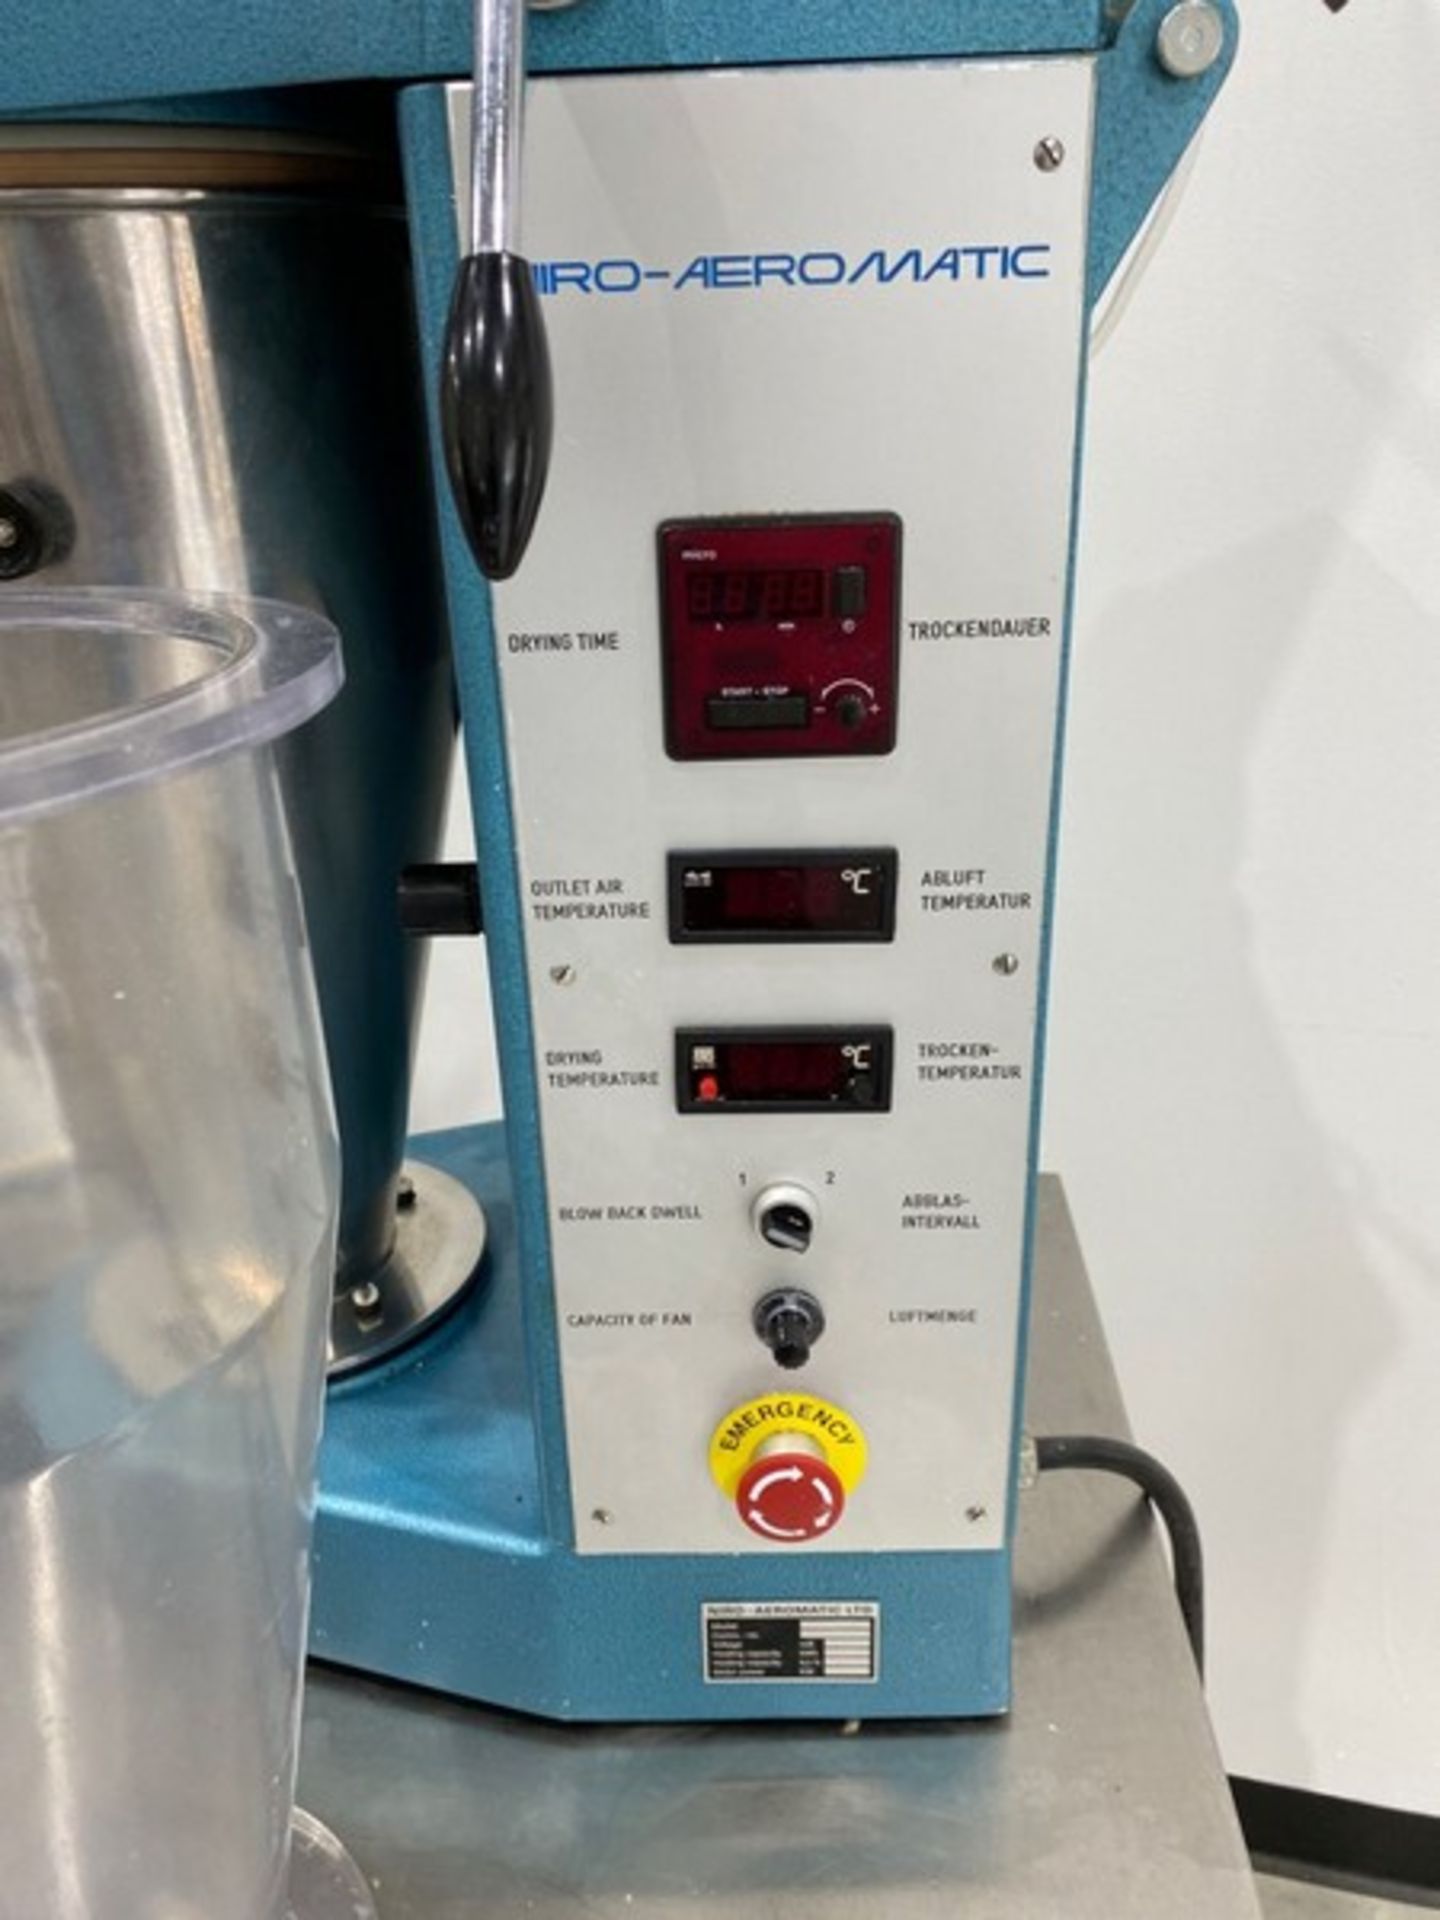 Aeromatic Strea1 Fluid Bed Dryer. Serial: 94900250, Unit comes with 4 bowls, 3 Acrylic, 1 - Image 6 of 7